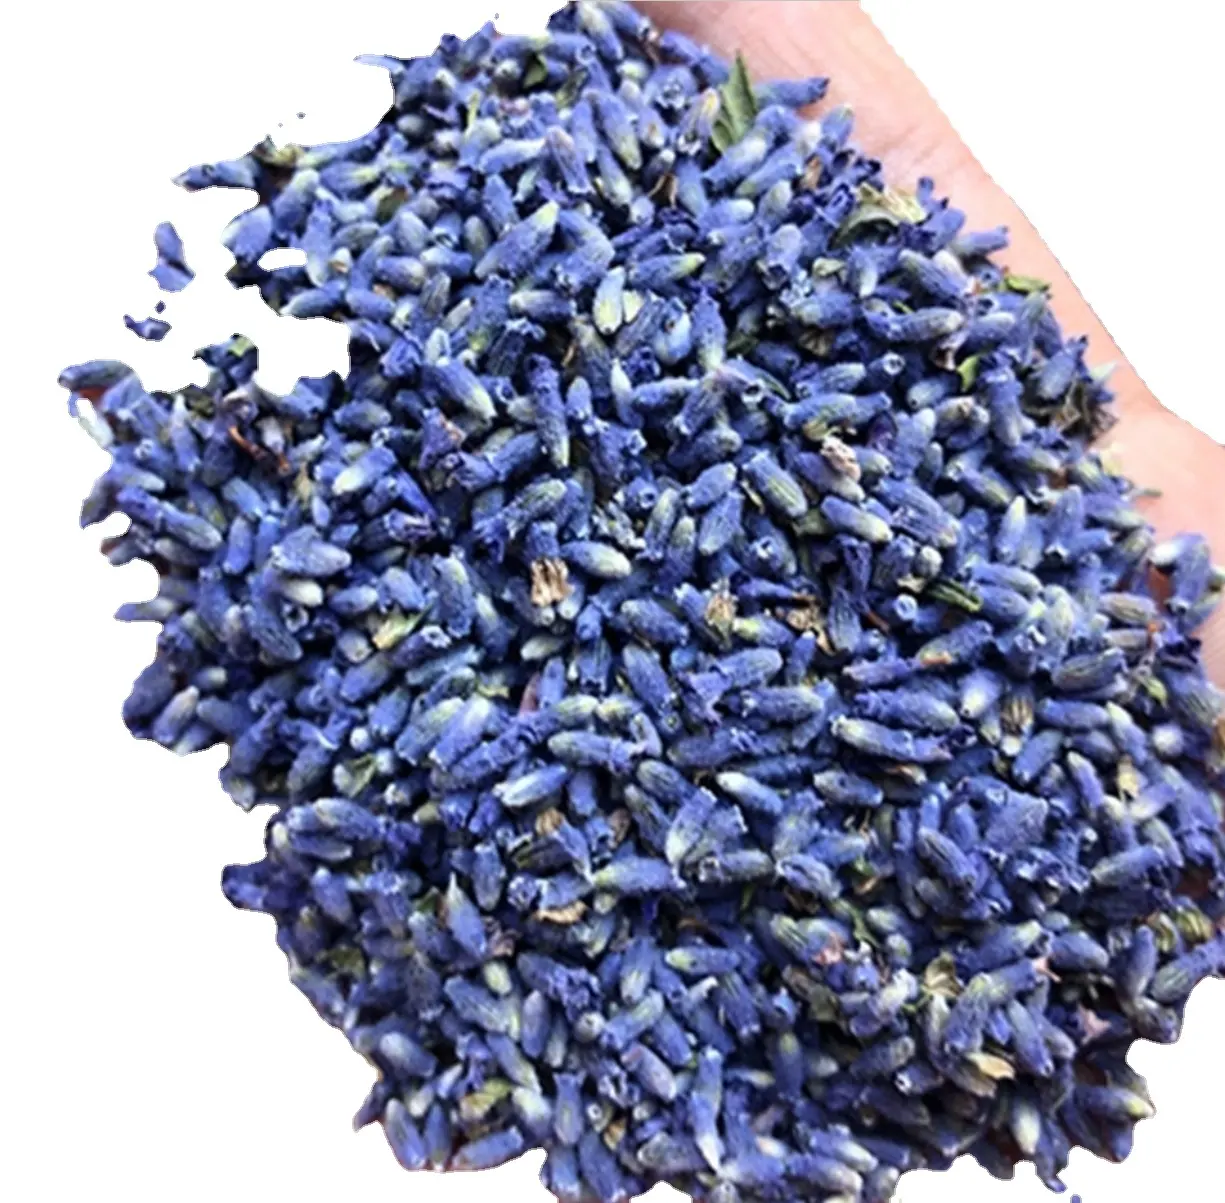 Chinese Flower Tea 100% Natural Lavender Organic Bulk Chinese Dried Top Quality Edible Dried lavender flower Natural scented Tea